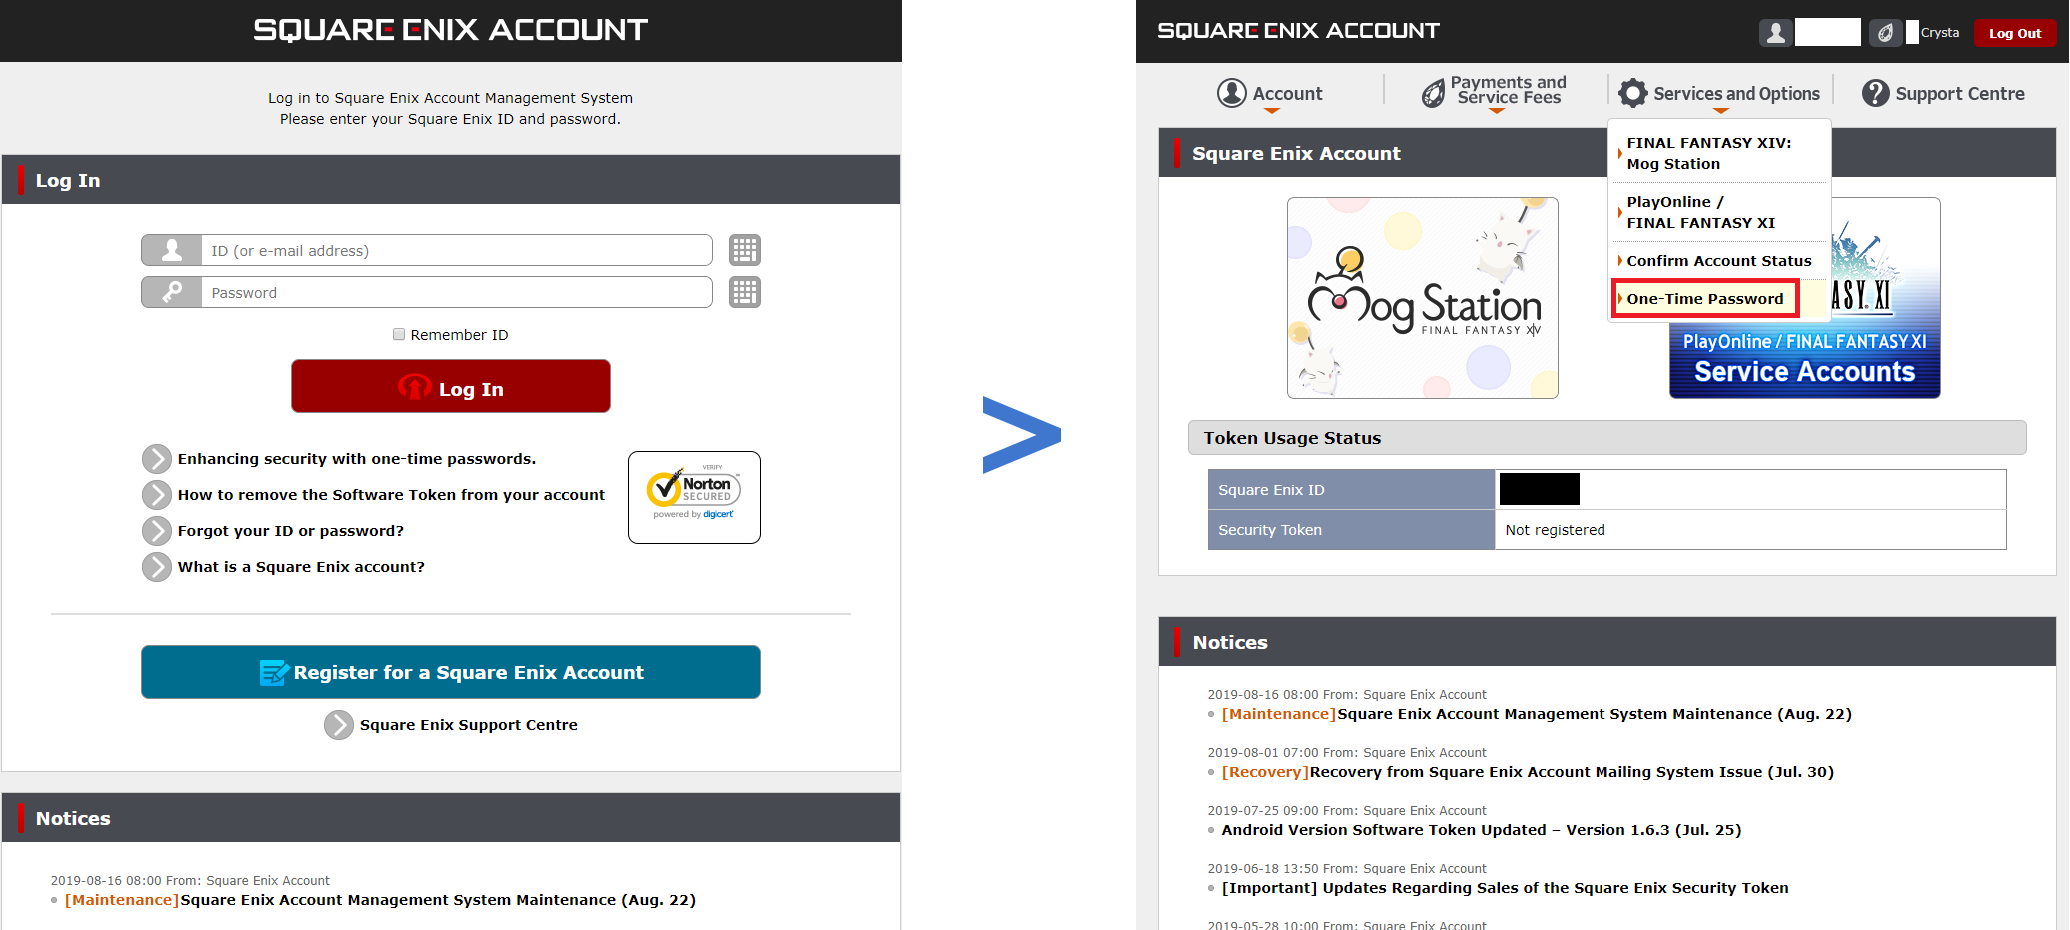 Screen transition diagram for logging into the Square Enix Account Management System and accessing the One-Time Password page